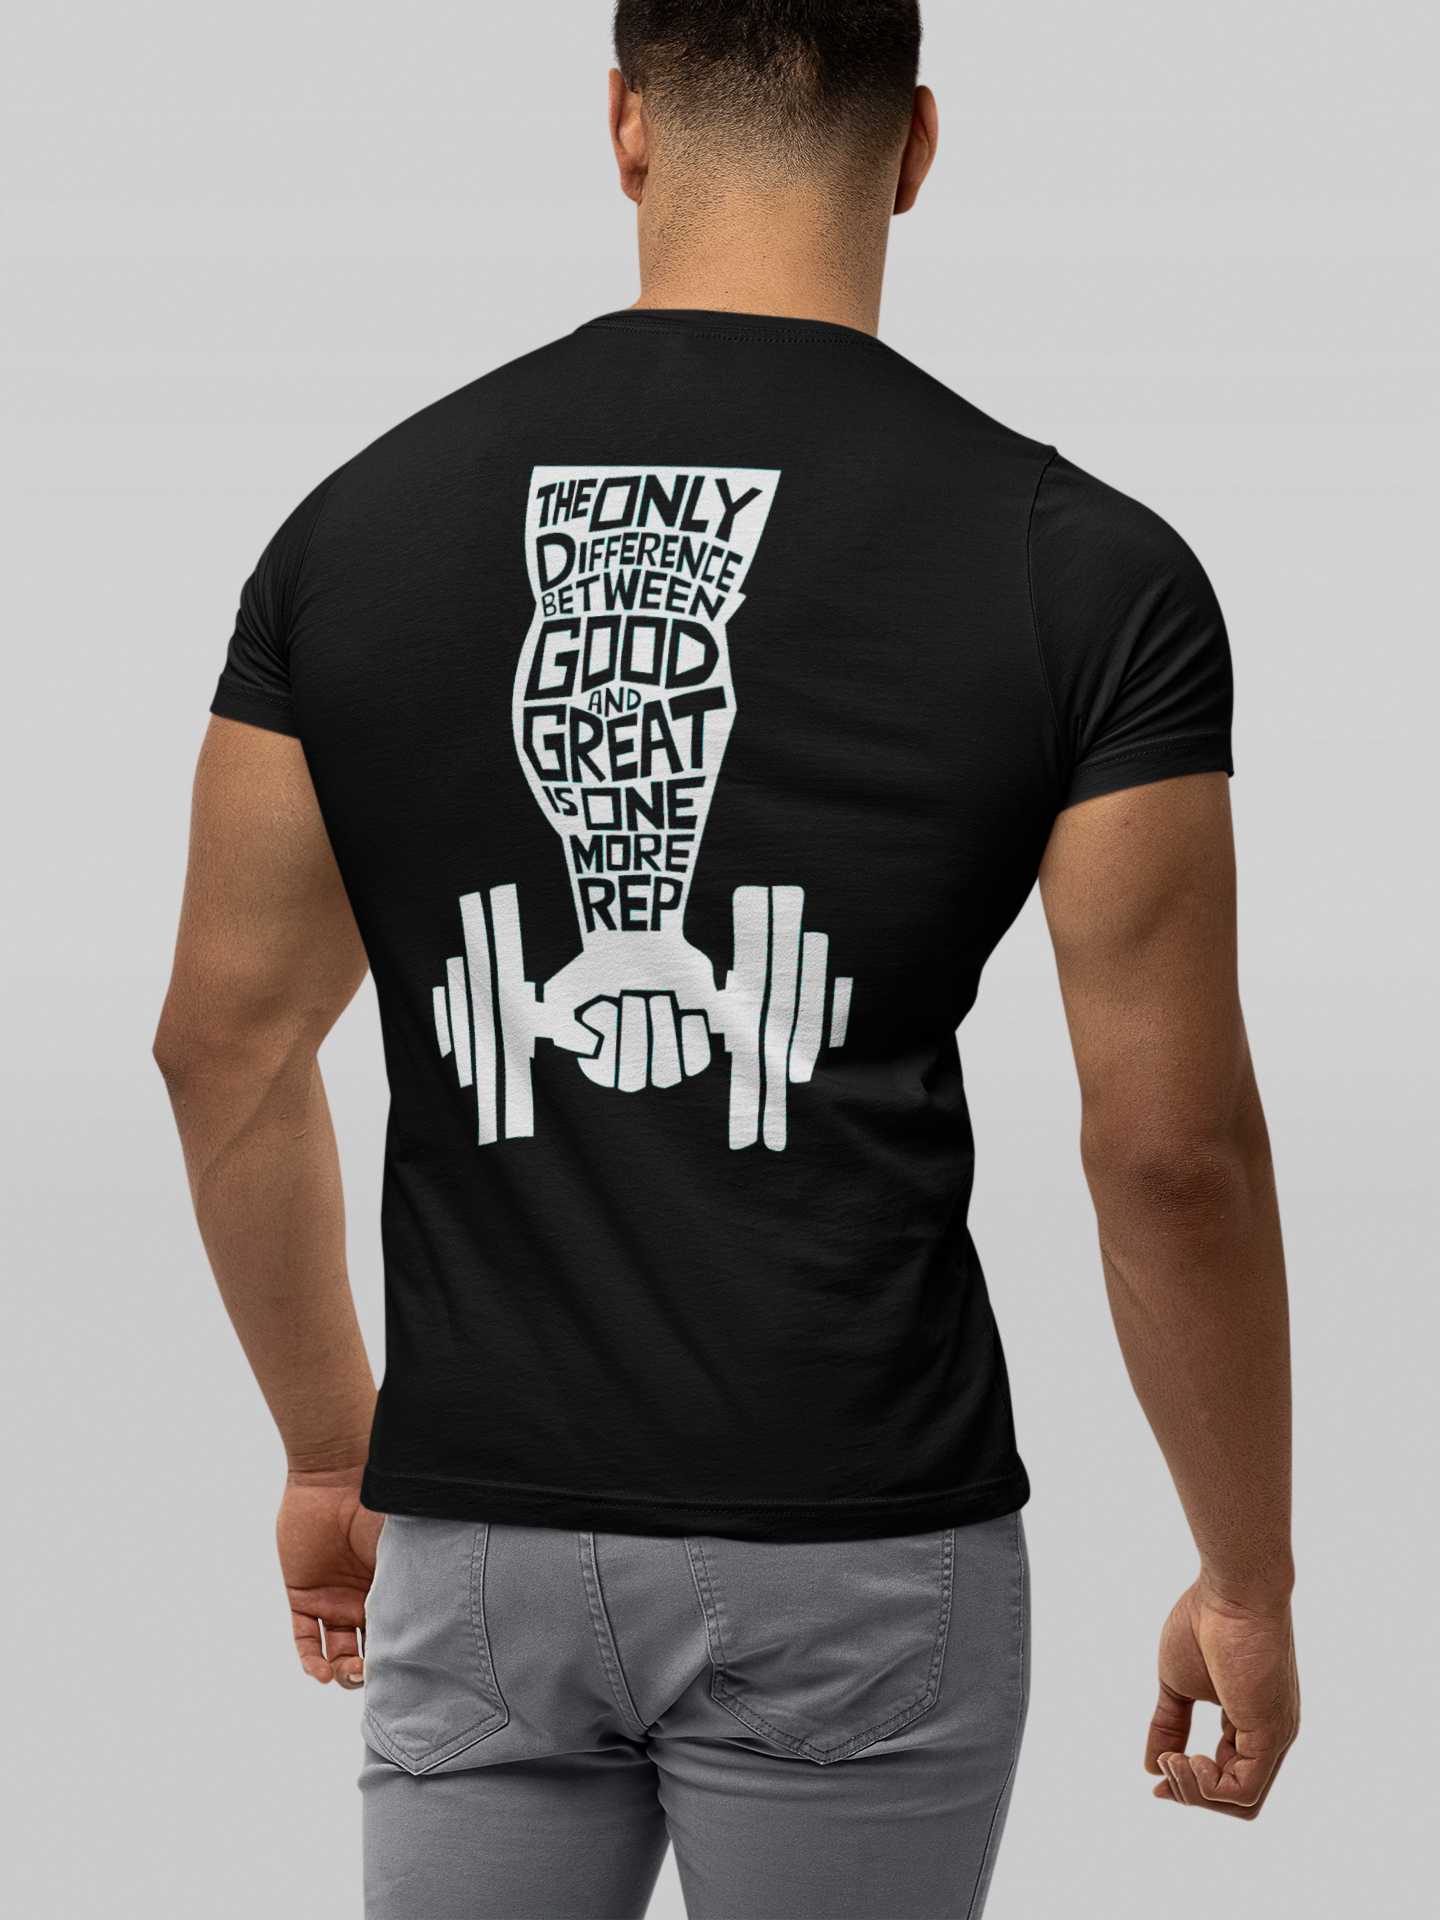 One More Rep - Gym TShirt Strong Soul Shirts & Tops